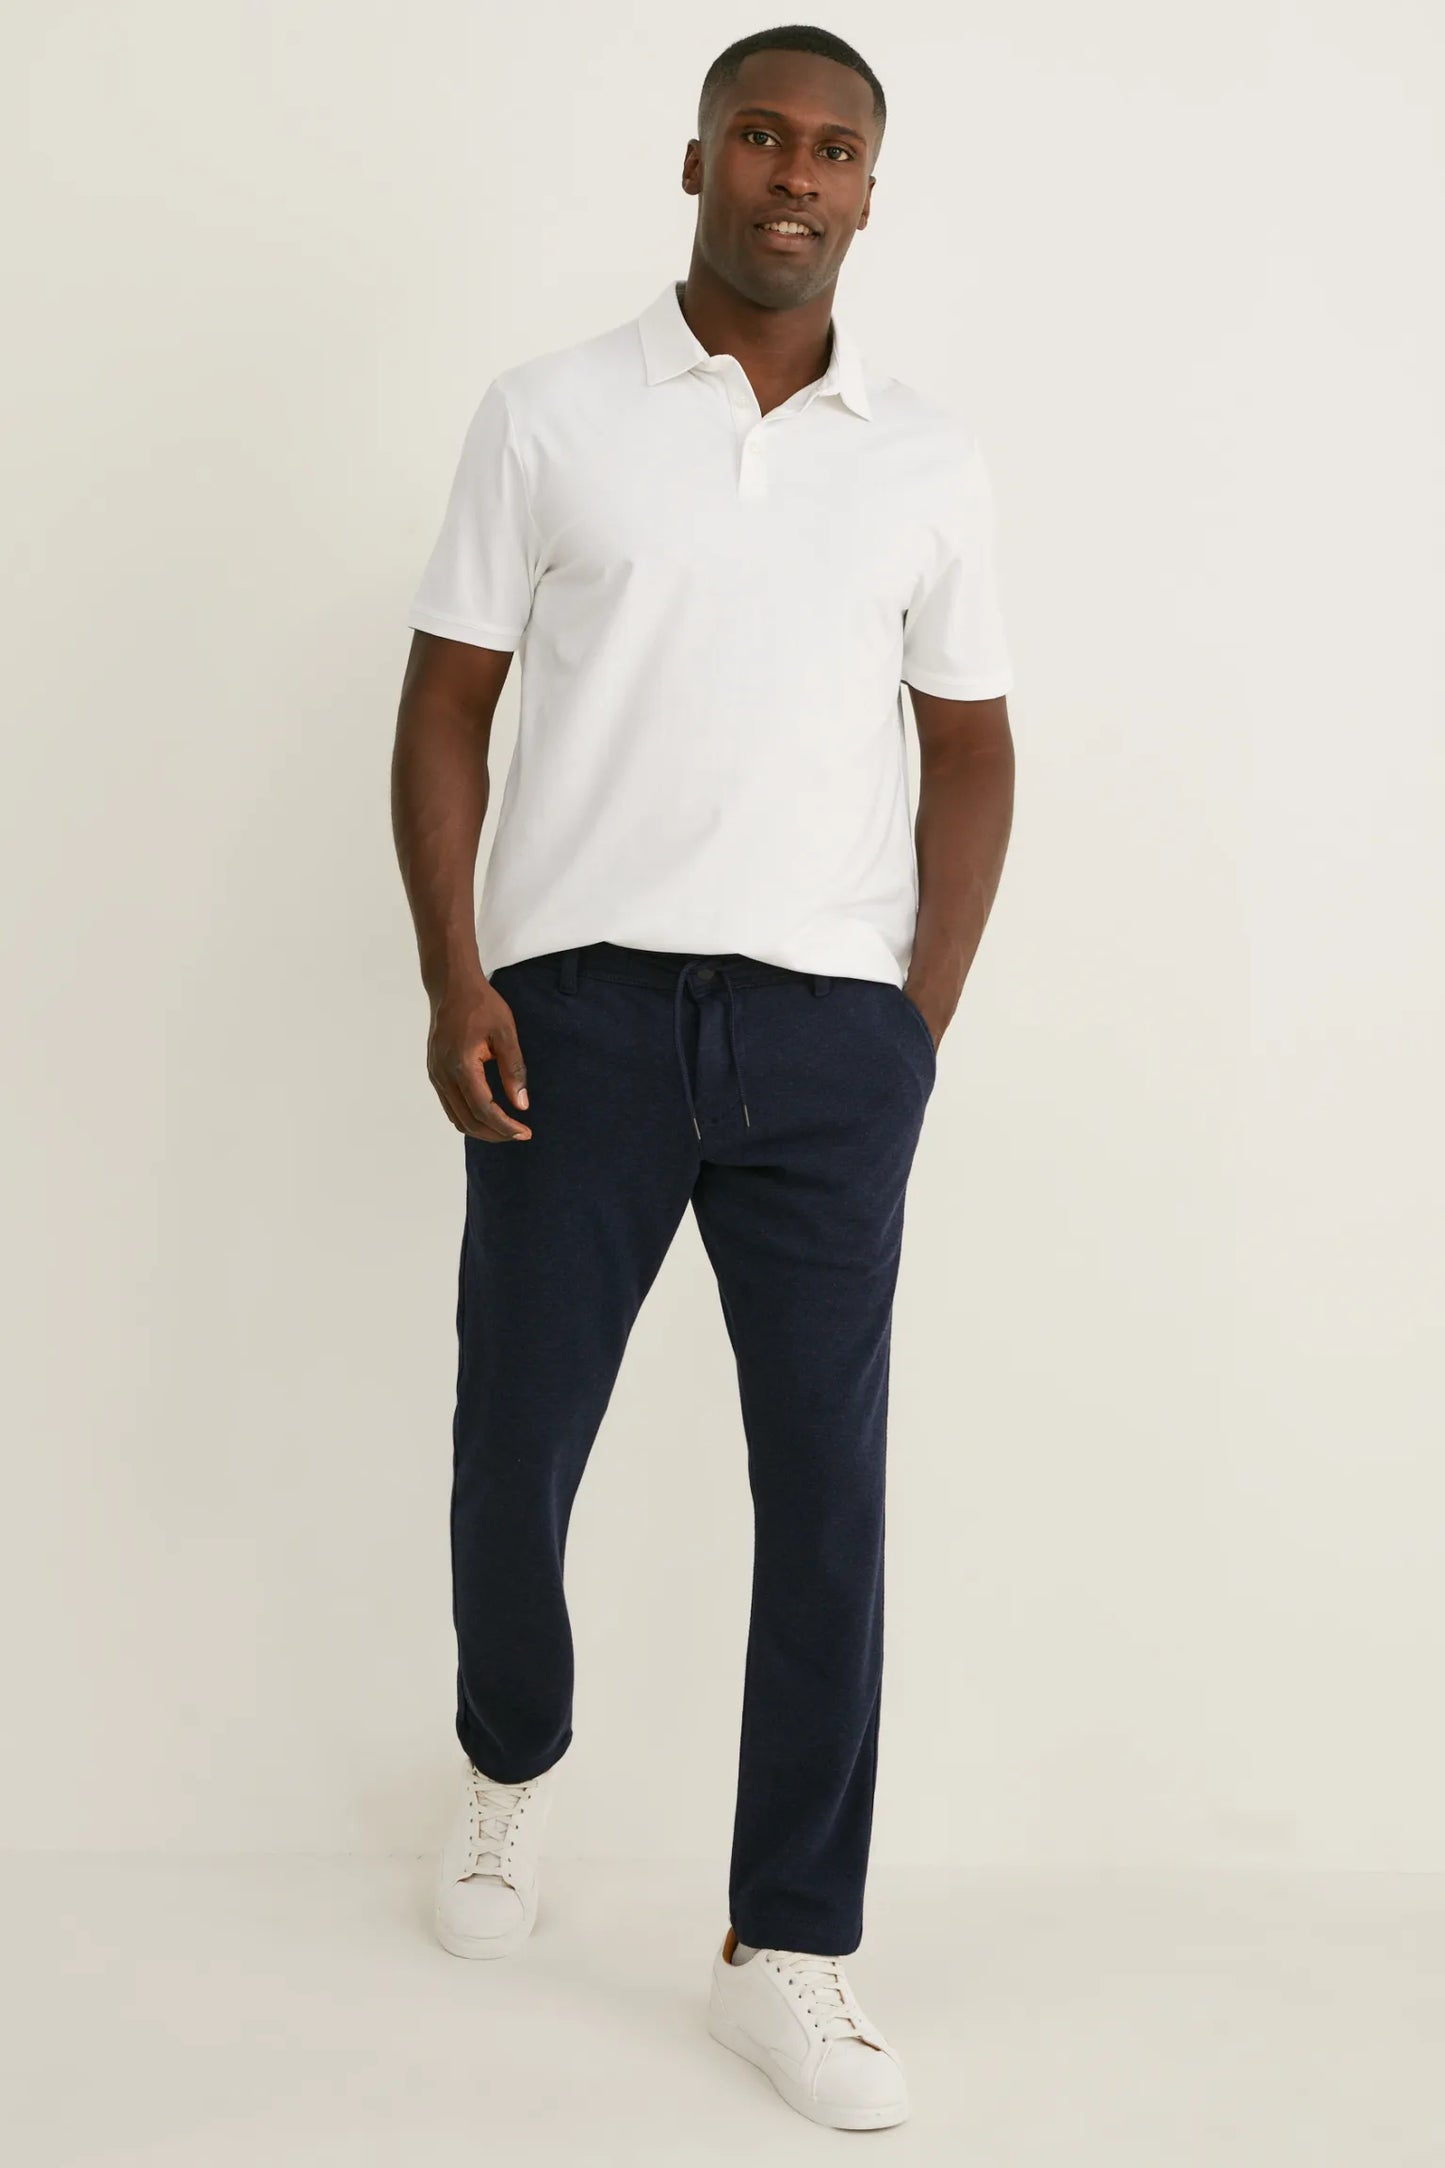 C&A tapered fit jogger pants in navy